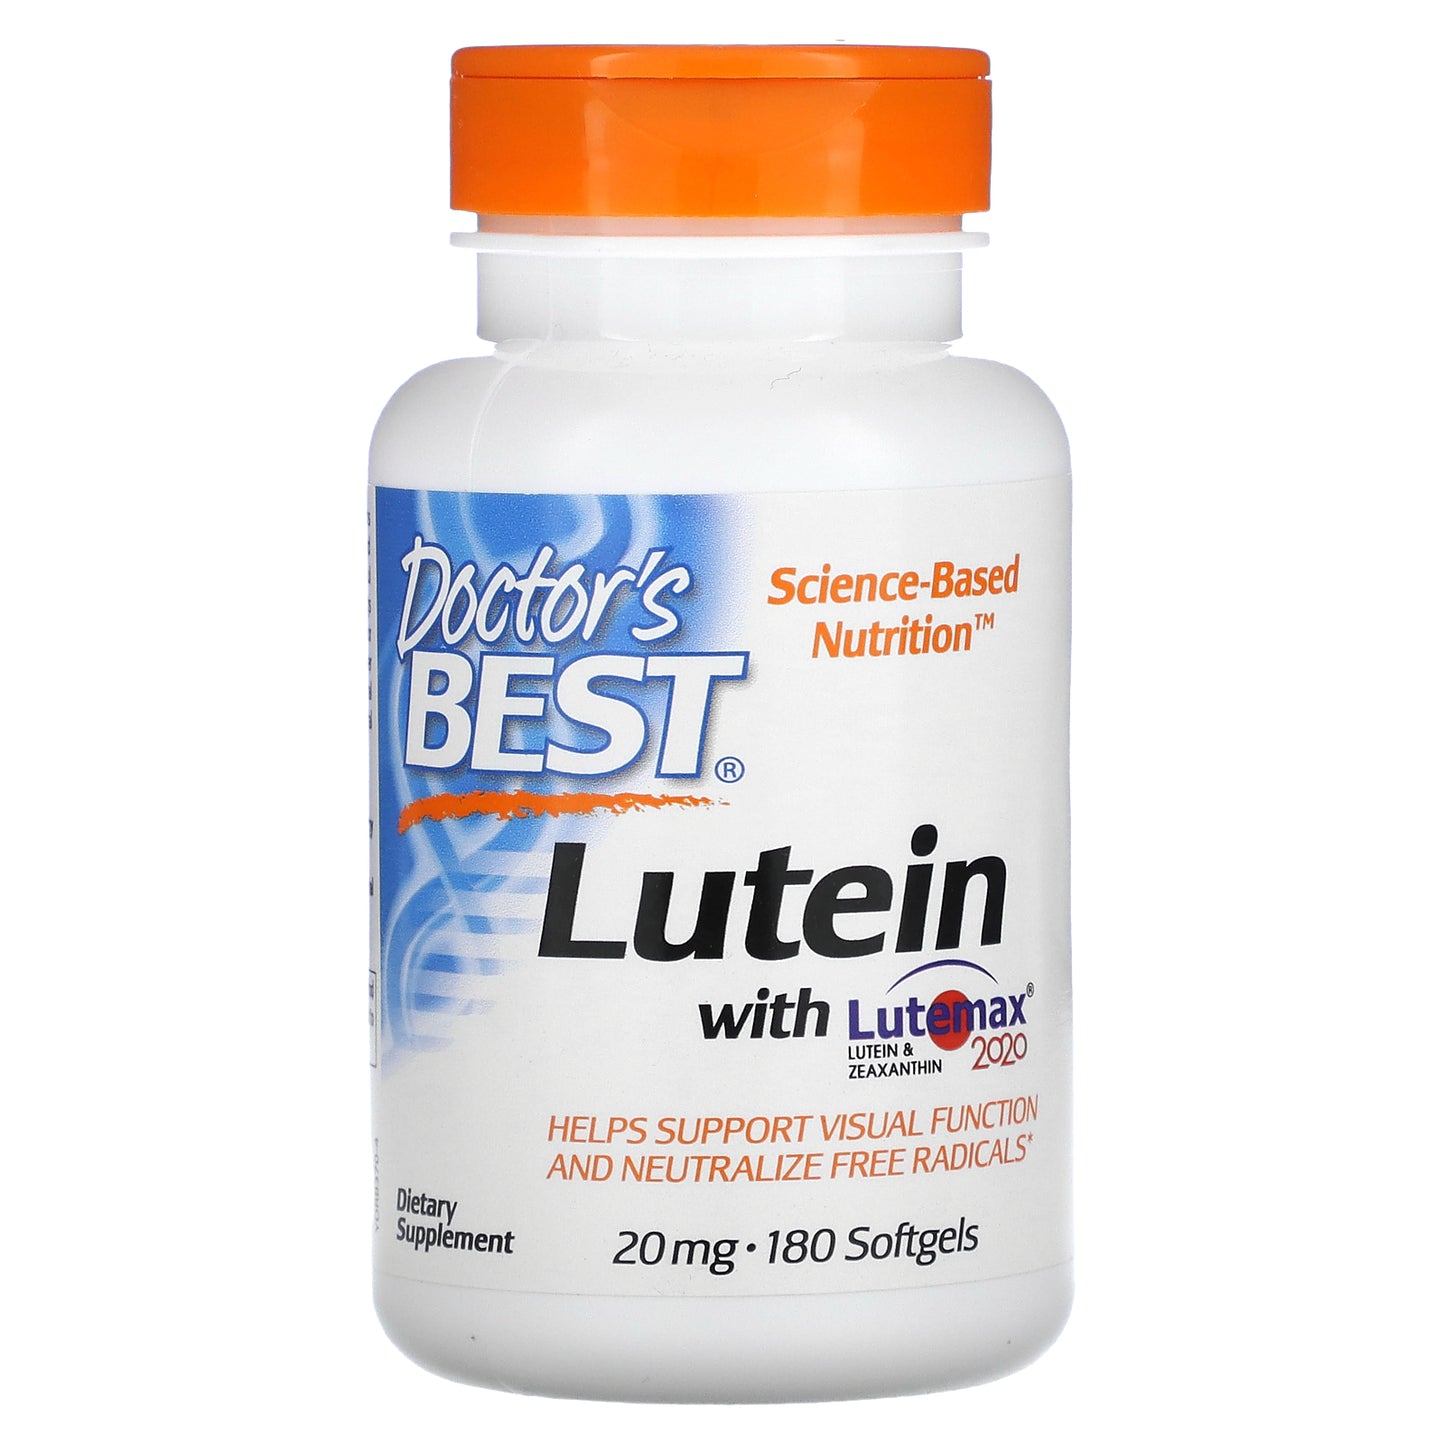 Doctor's Best Lutein with Lutemax 2020, 20 mg, 180 Softgels